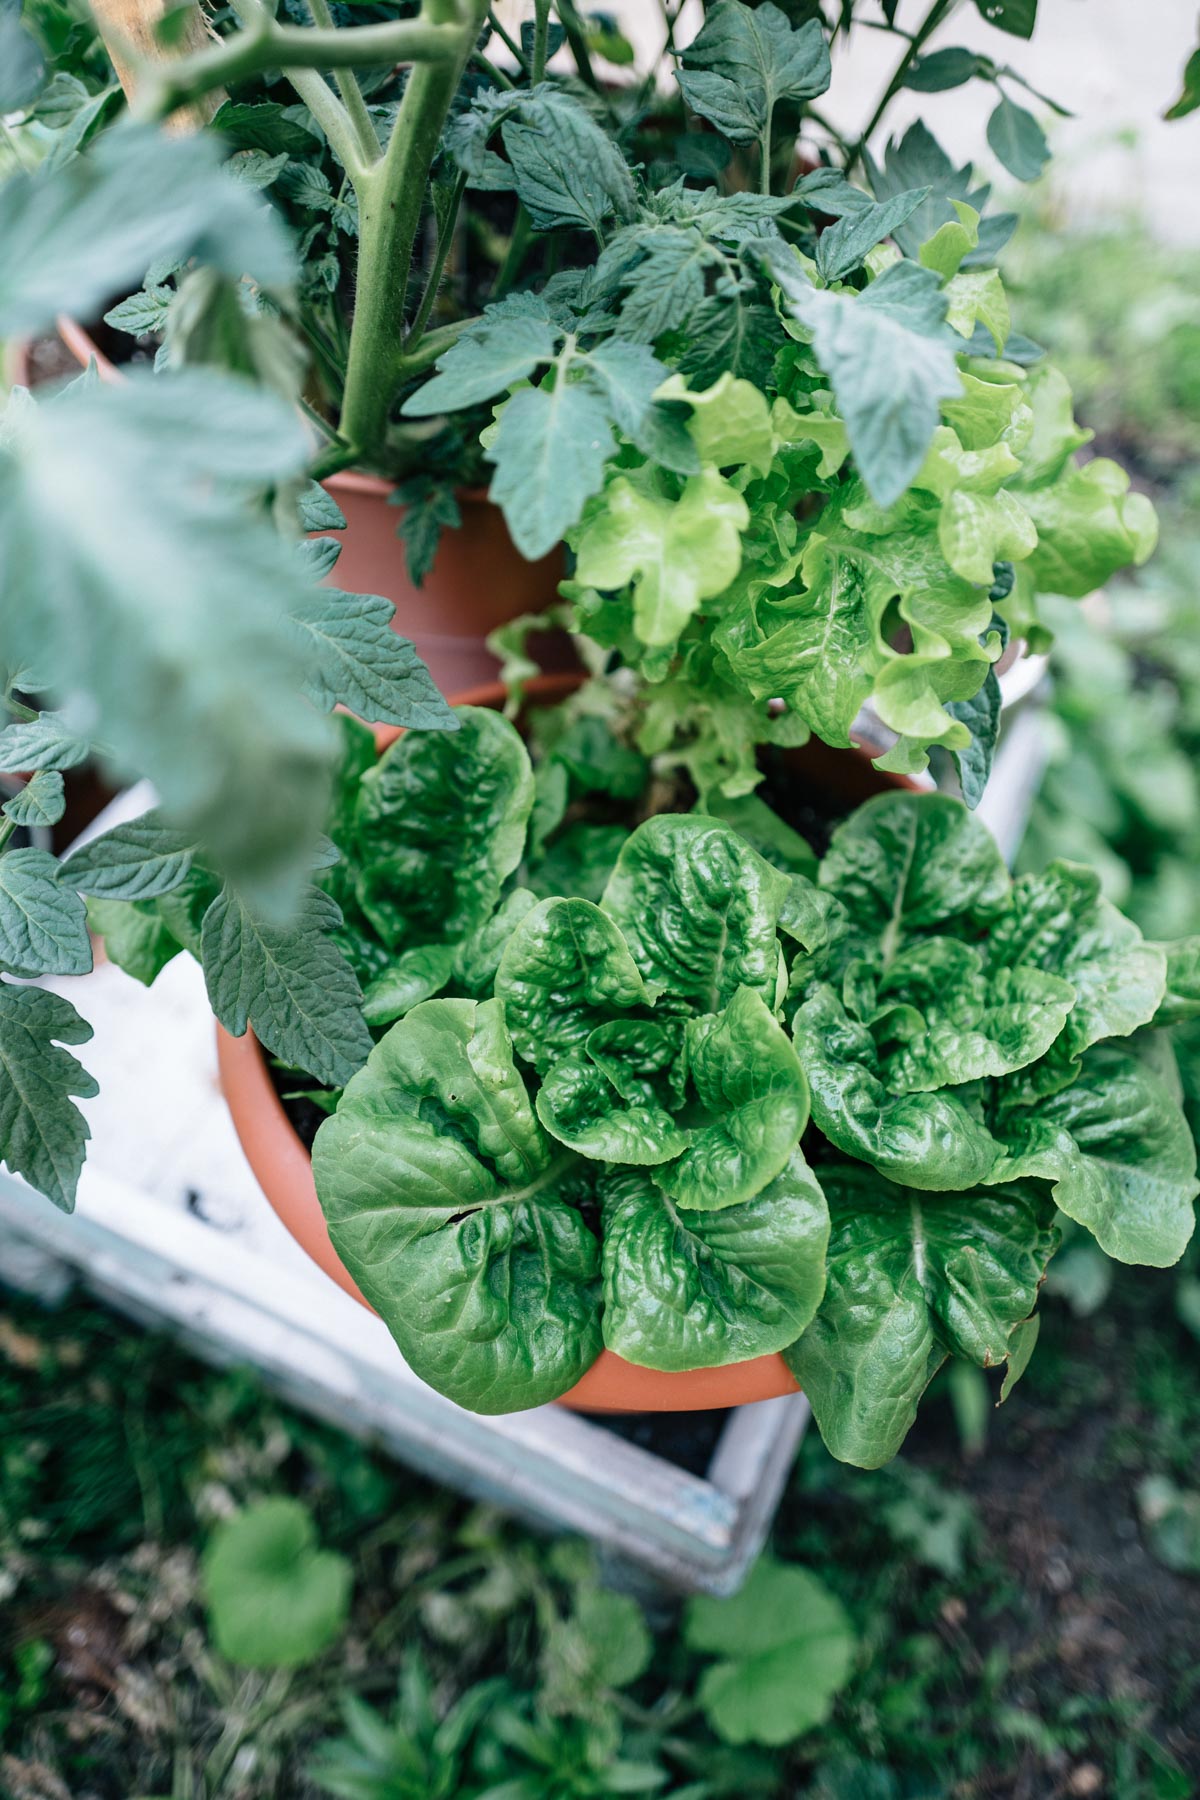 Jess Ann Kirby shares her tips for growing vegetables such as lettuce in potted plants